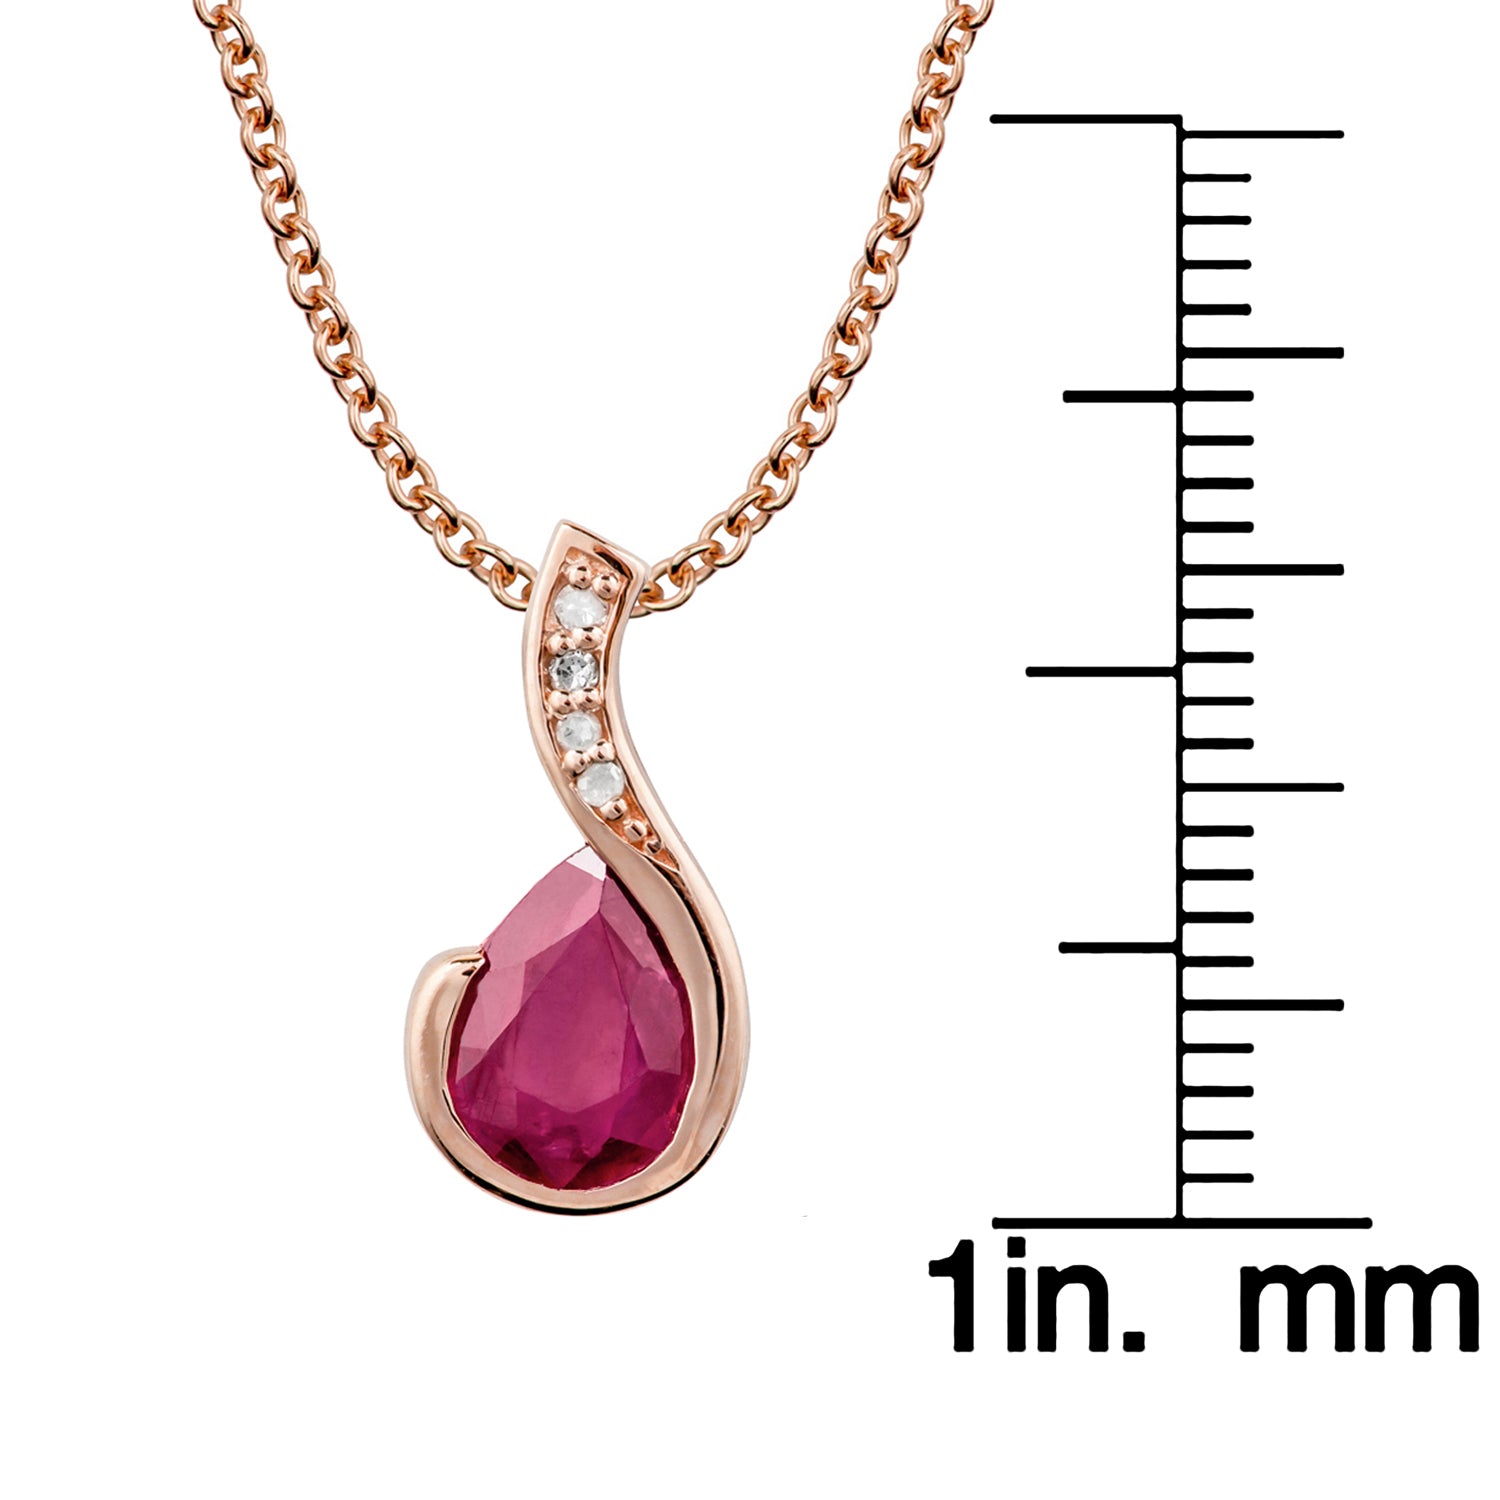 10k Rose Gold Genuine Pear Shape Ruby and Diamond Drop Pendant Necklace